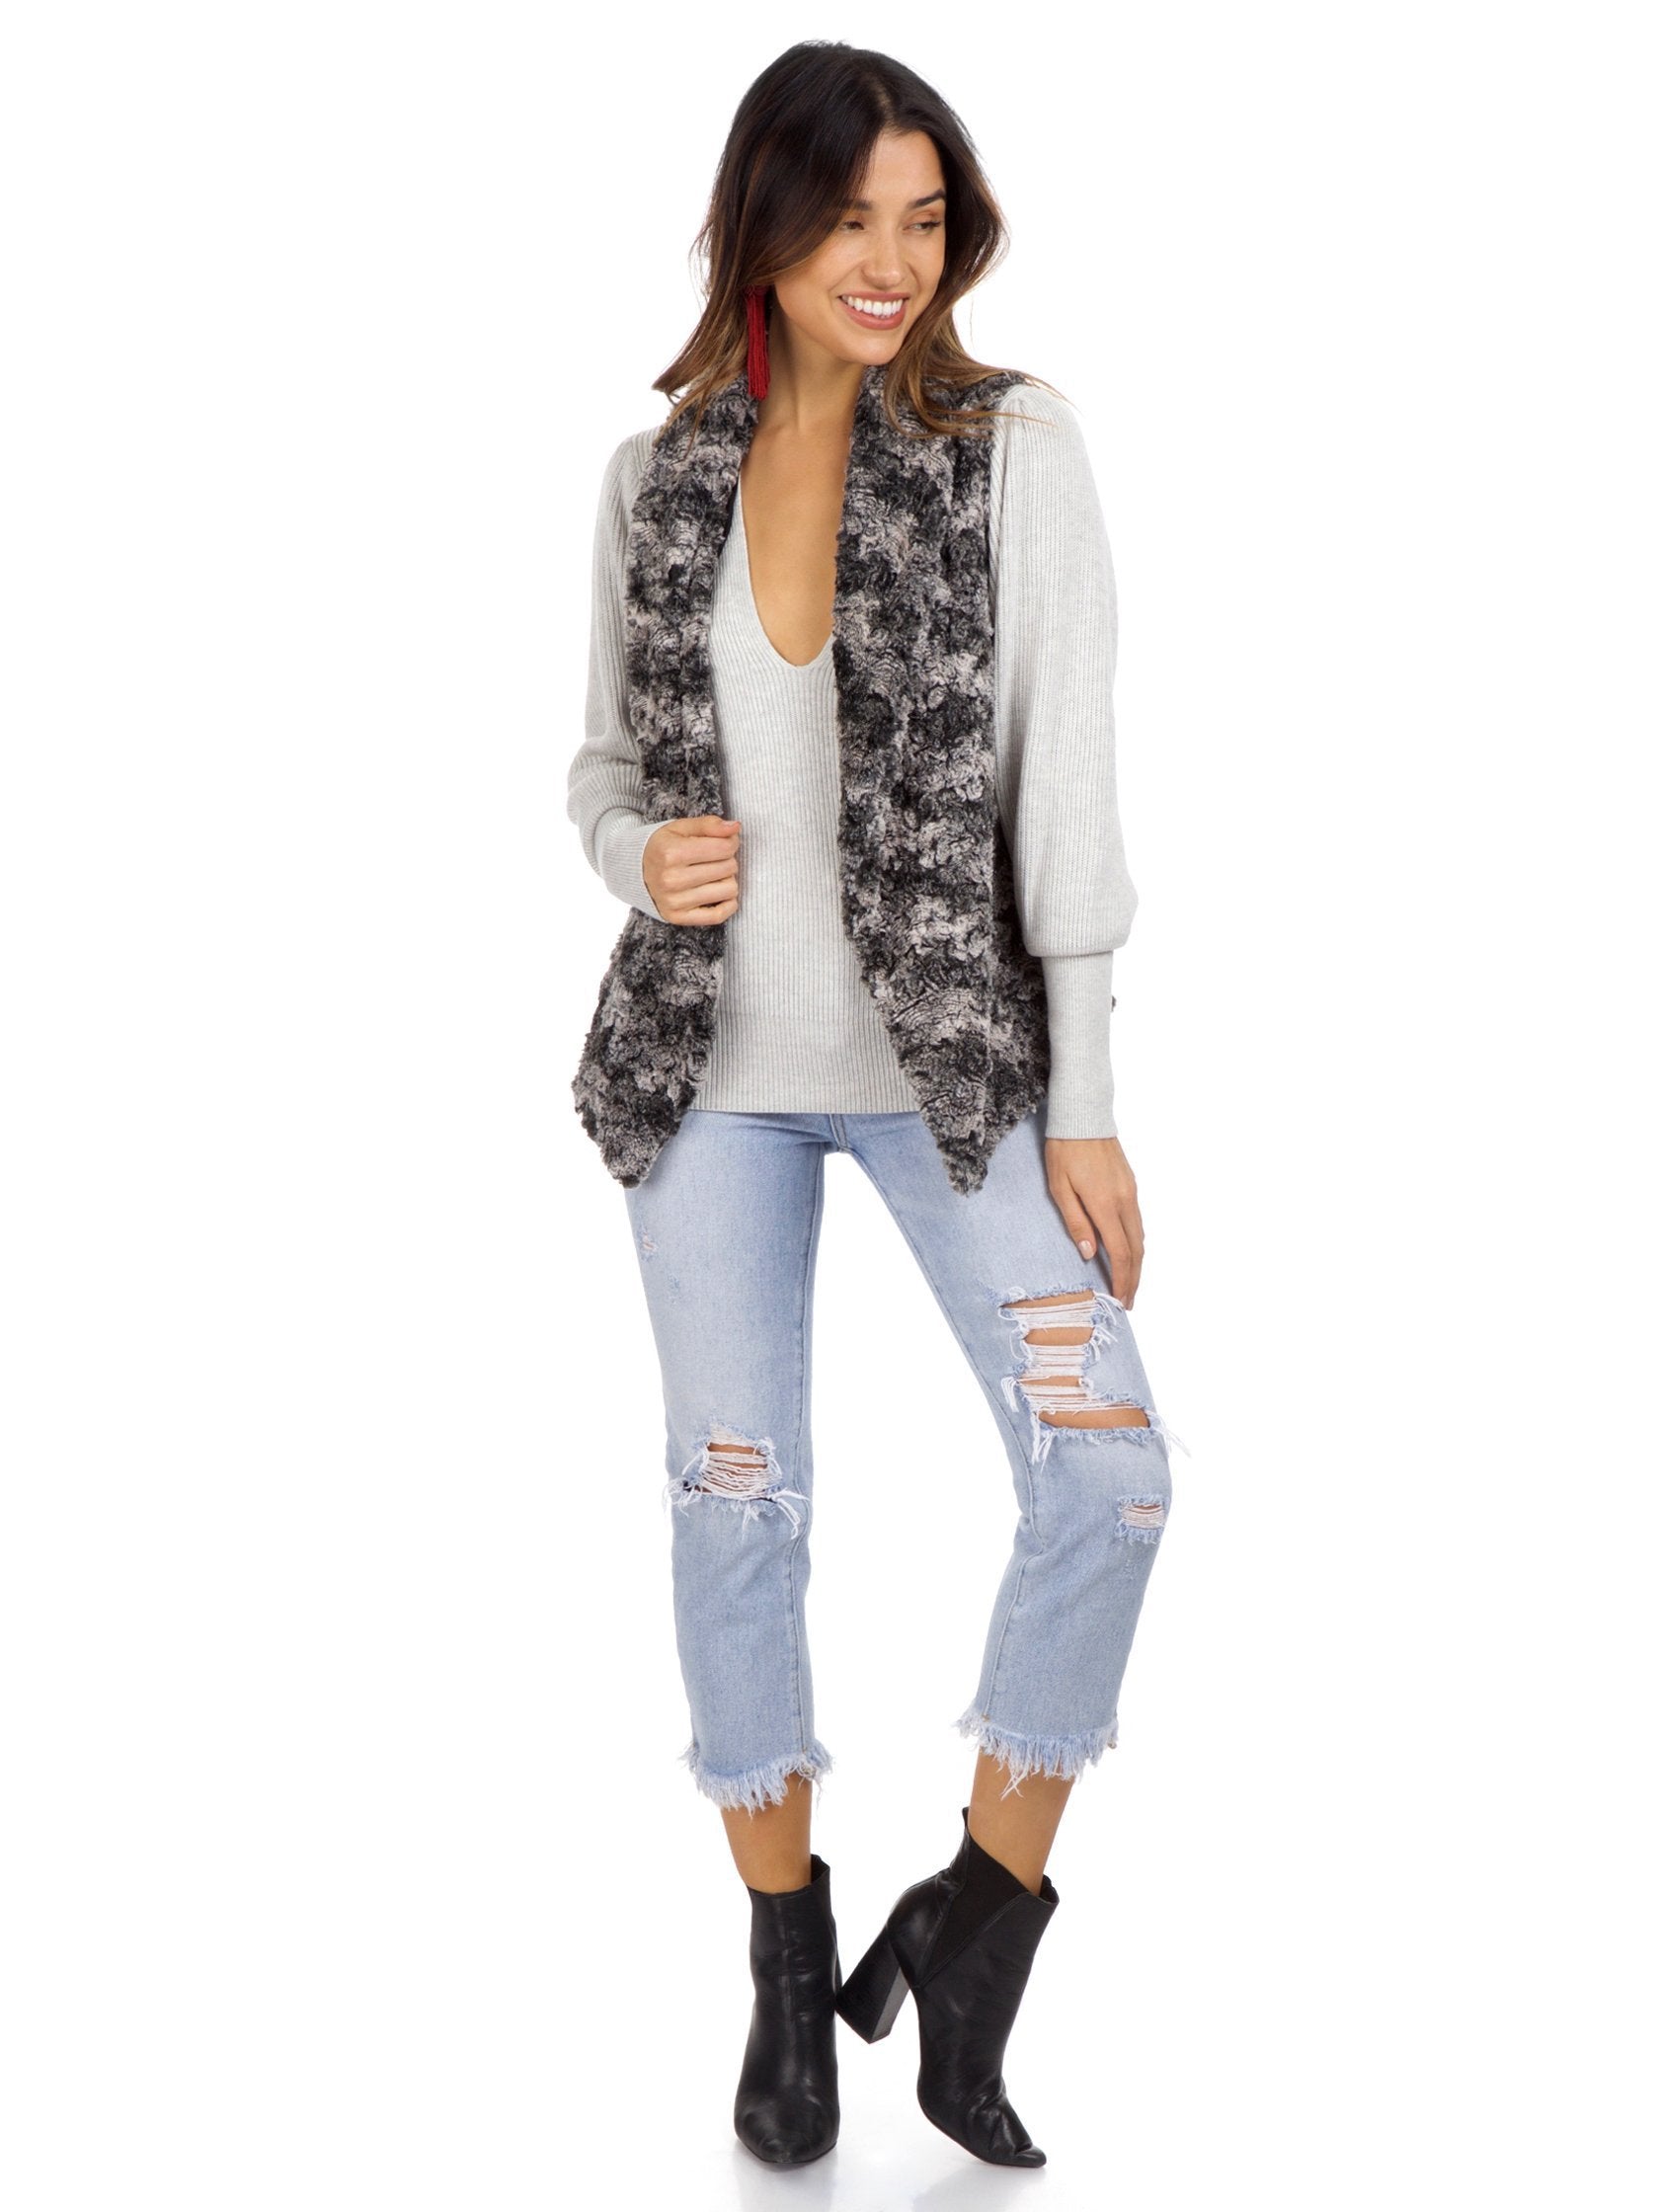 Women outfit in a vest rental from Show Me Your Mumu called Fausta Vest Wolfpack Faux Fur Vest